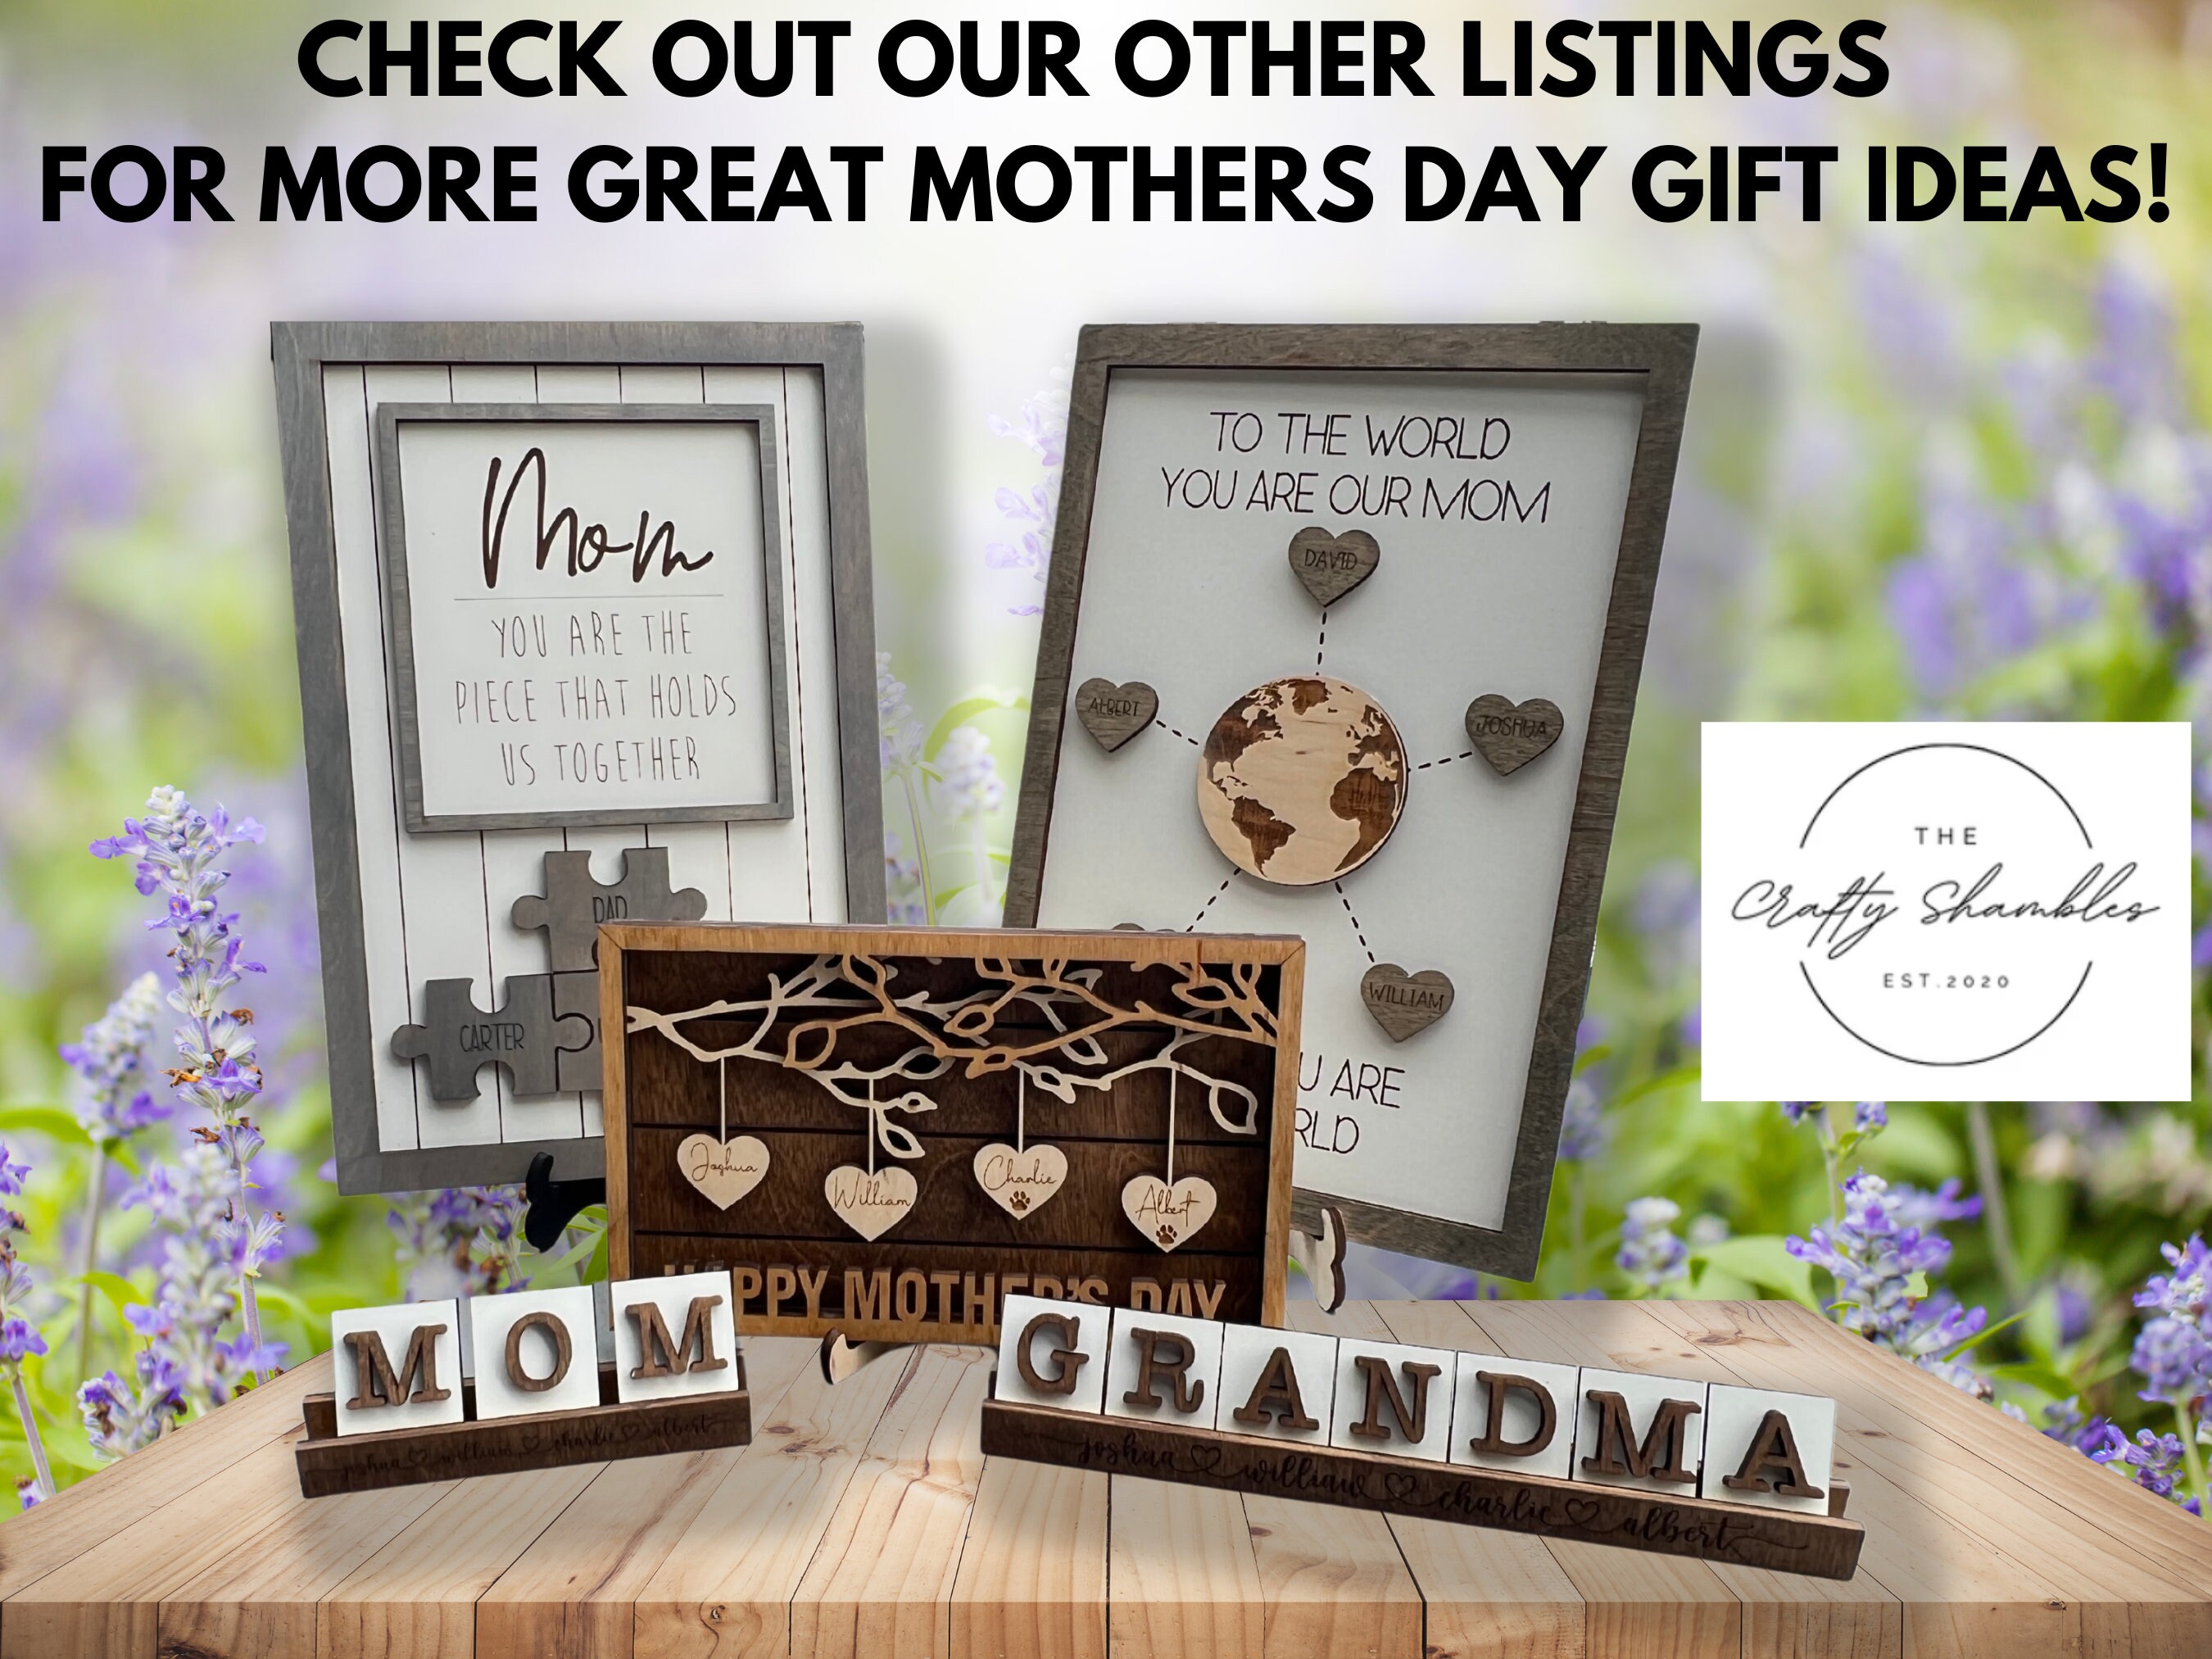 SDJMa Personalized Mom You are The Piece That Holds Us Together Puzzle Sign  , Personalized Wooden Art Craft, Happy Mothers Day Gift,Mother's Gifts For  From Daughter Son 